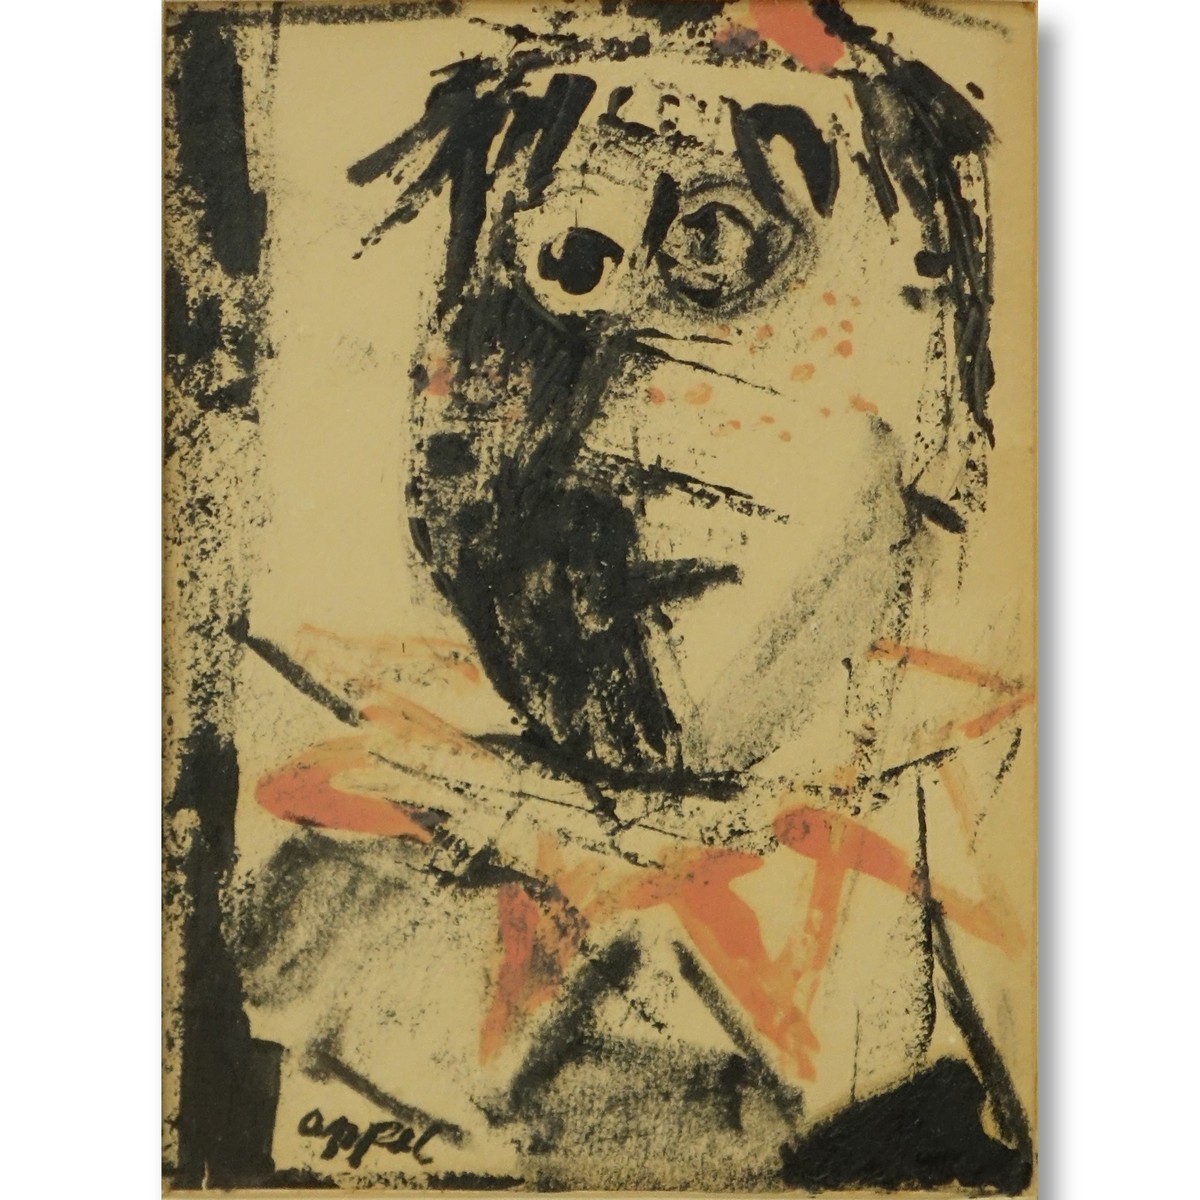 Karel Christiaan Appel, American (1921 - 2006) Ink and watercolor on paper "Clown" Signed Lower Left. Possibly 1950.